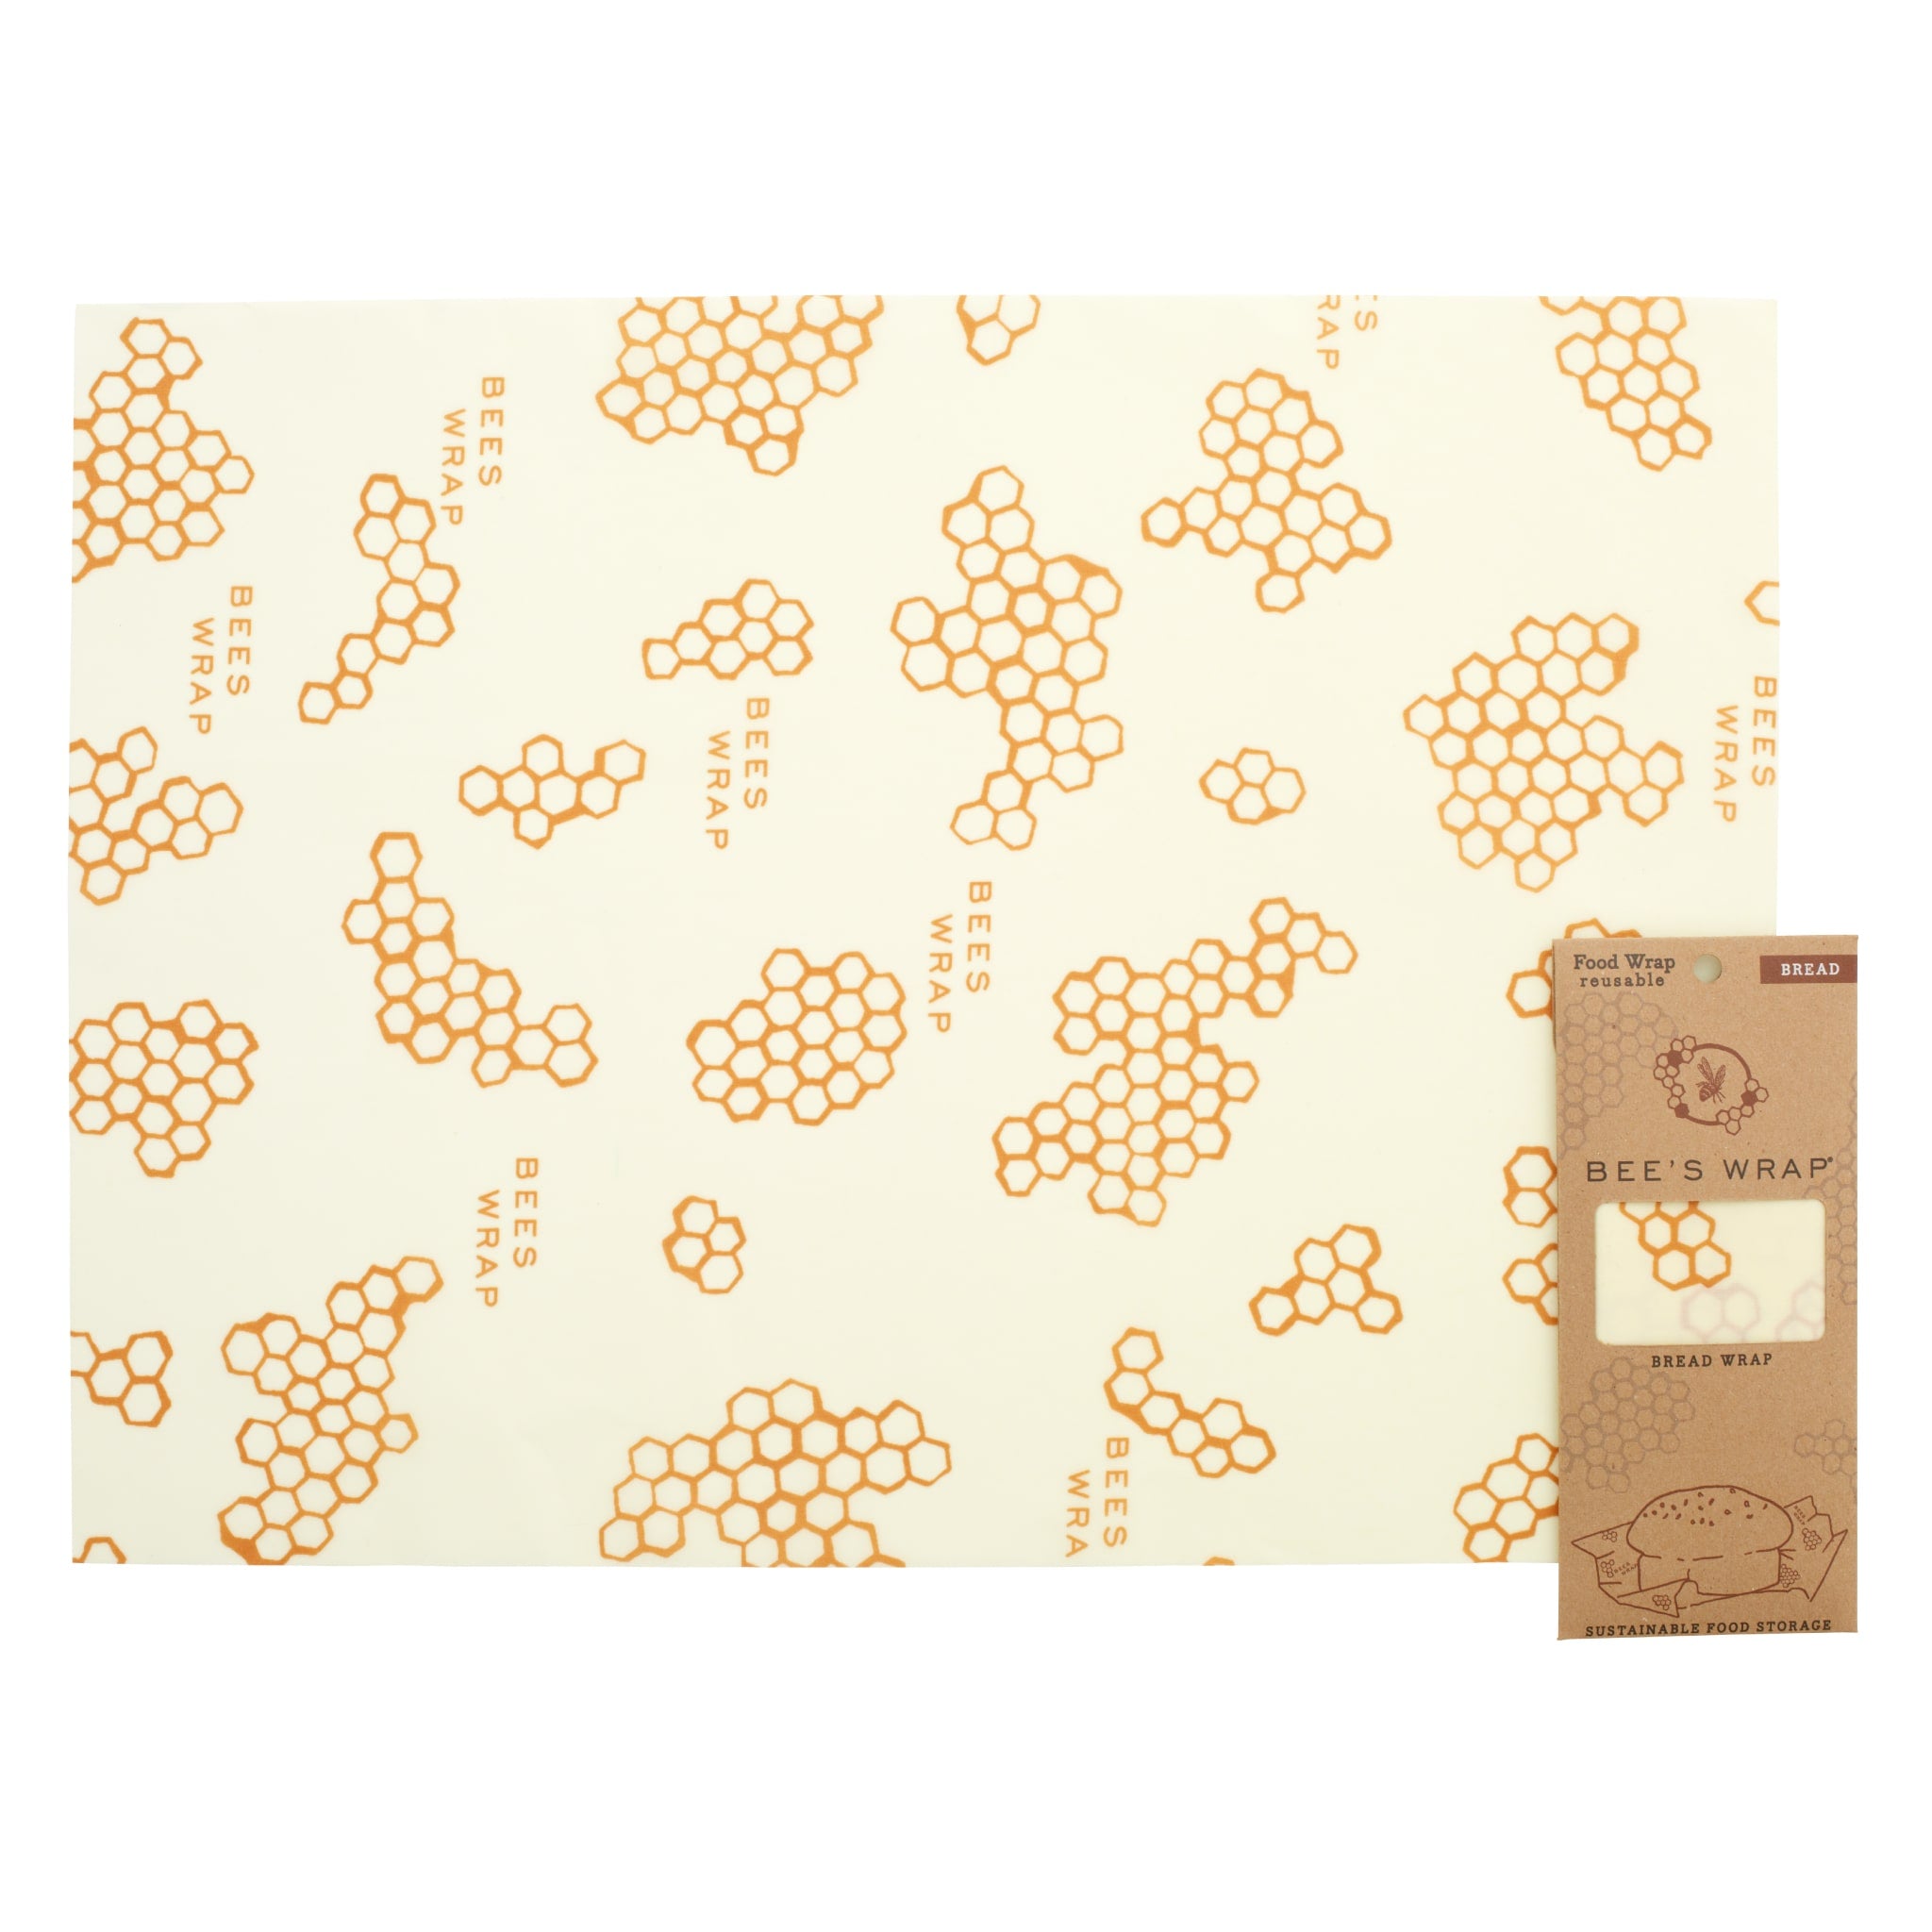 XL beeswax wrap next to packaging